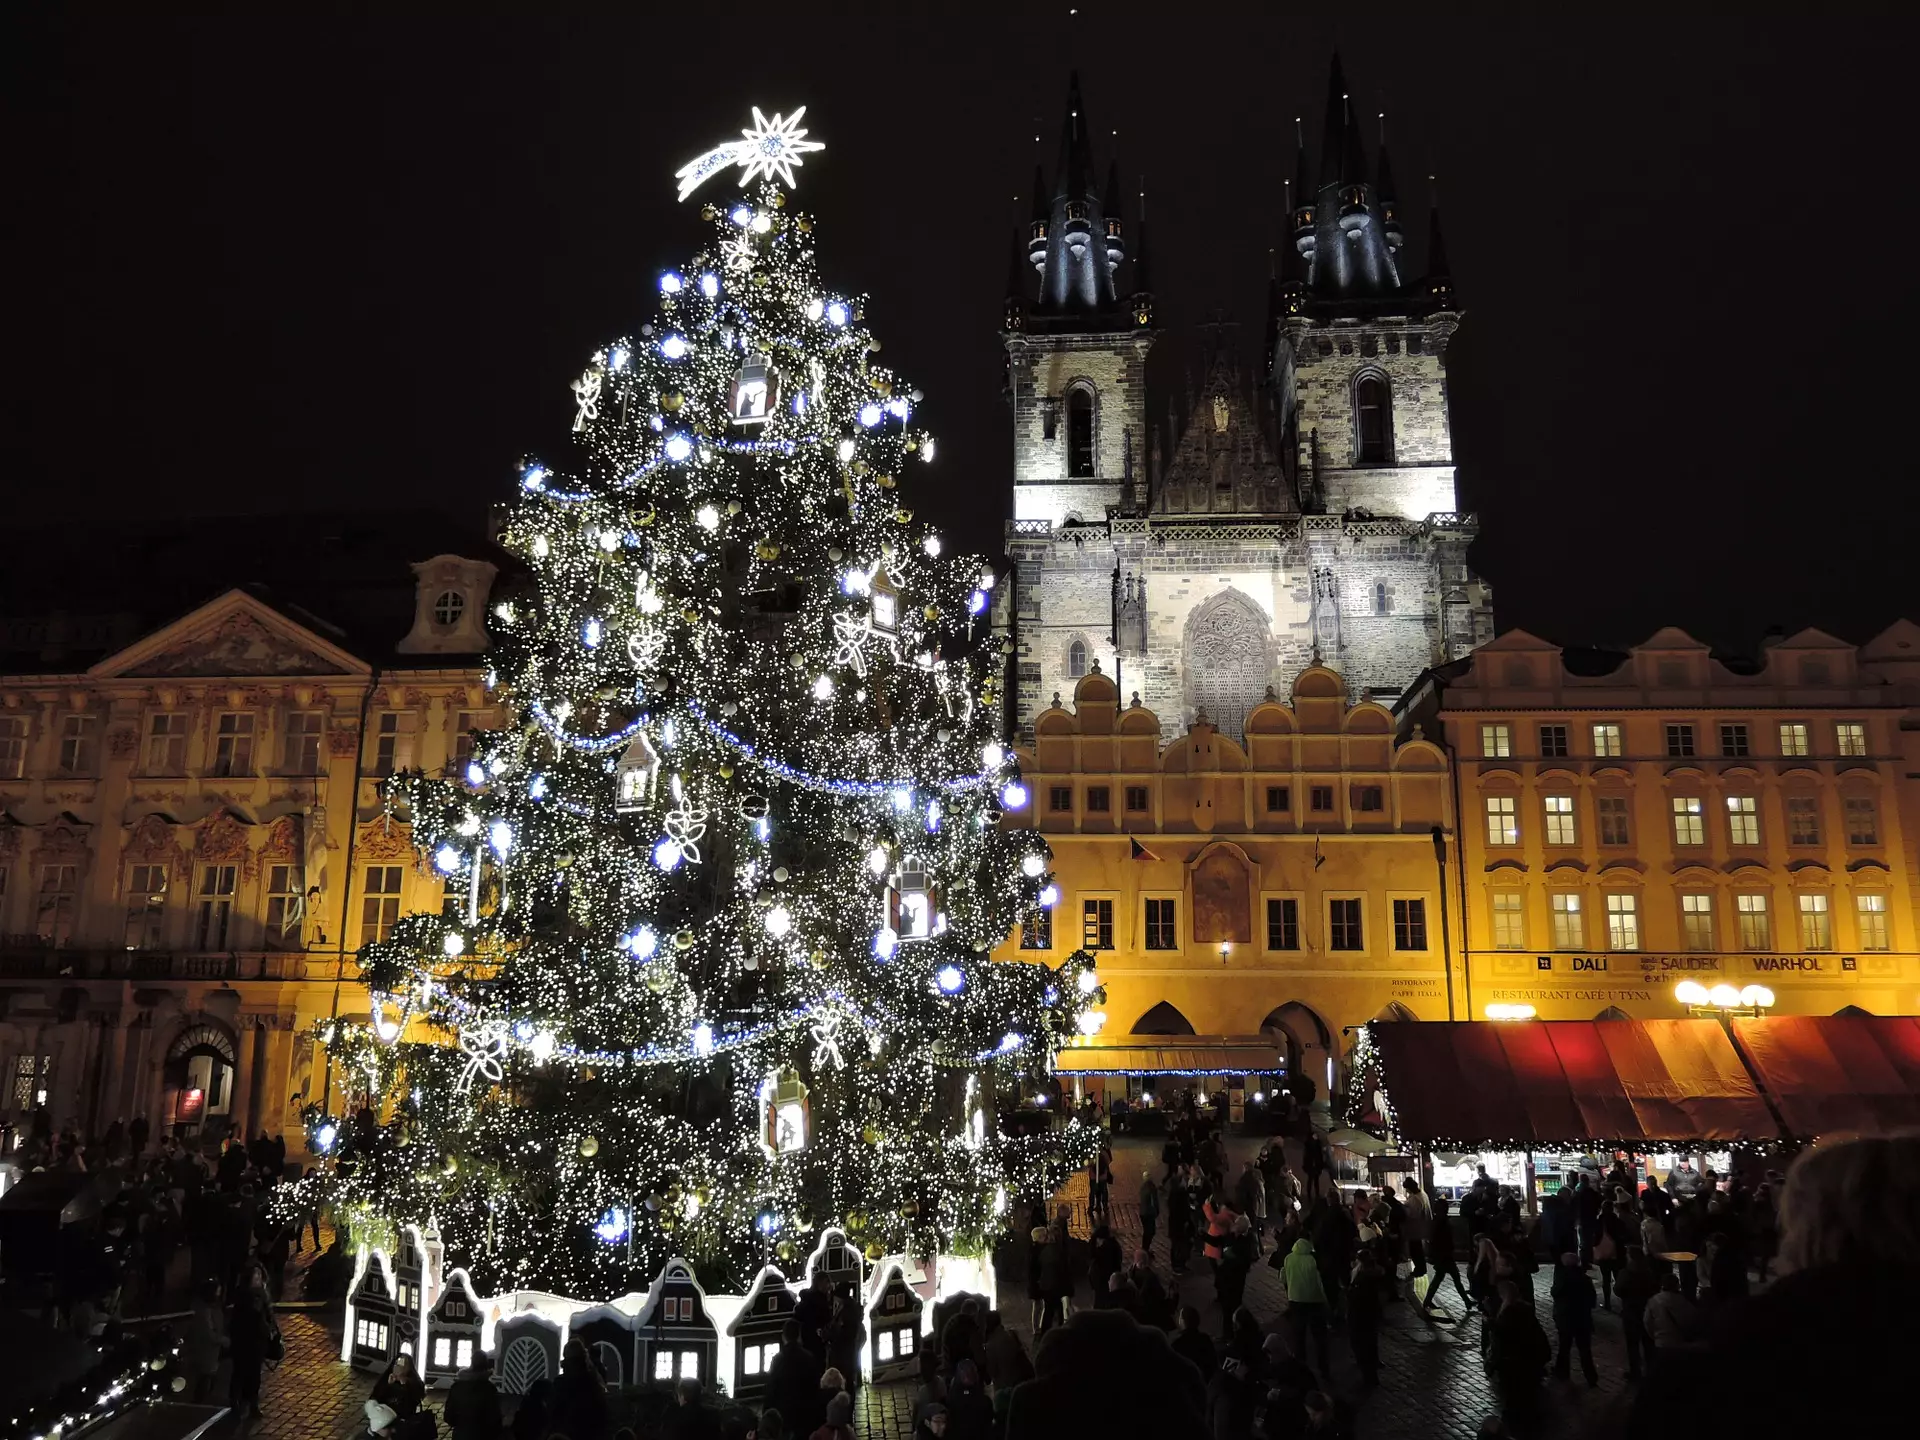 Prague is one of four cities you will visit if lucky enough to land the 'job' (